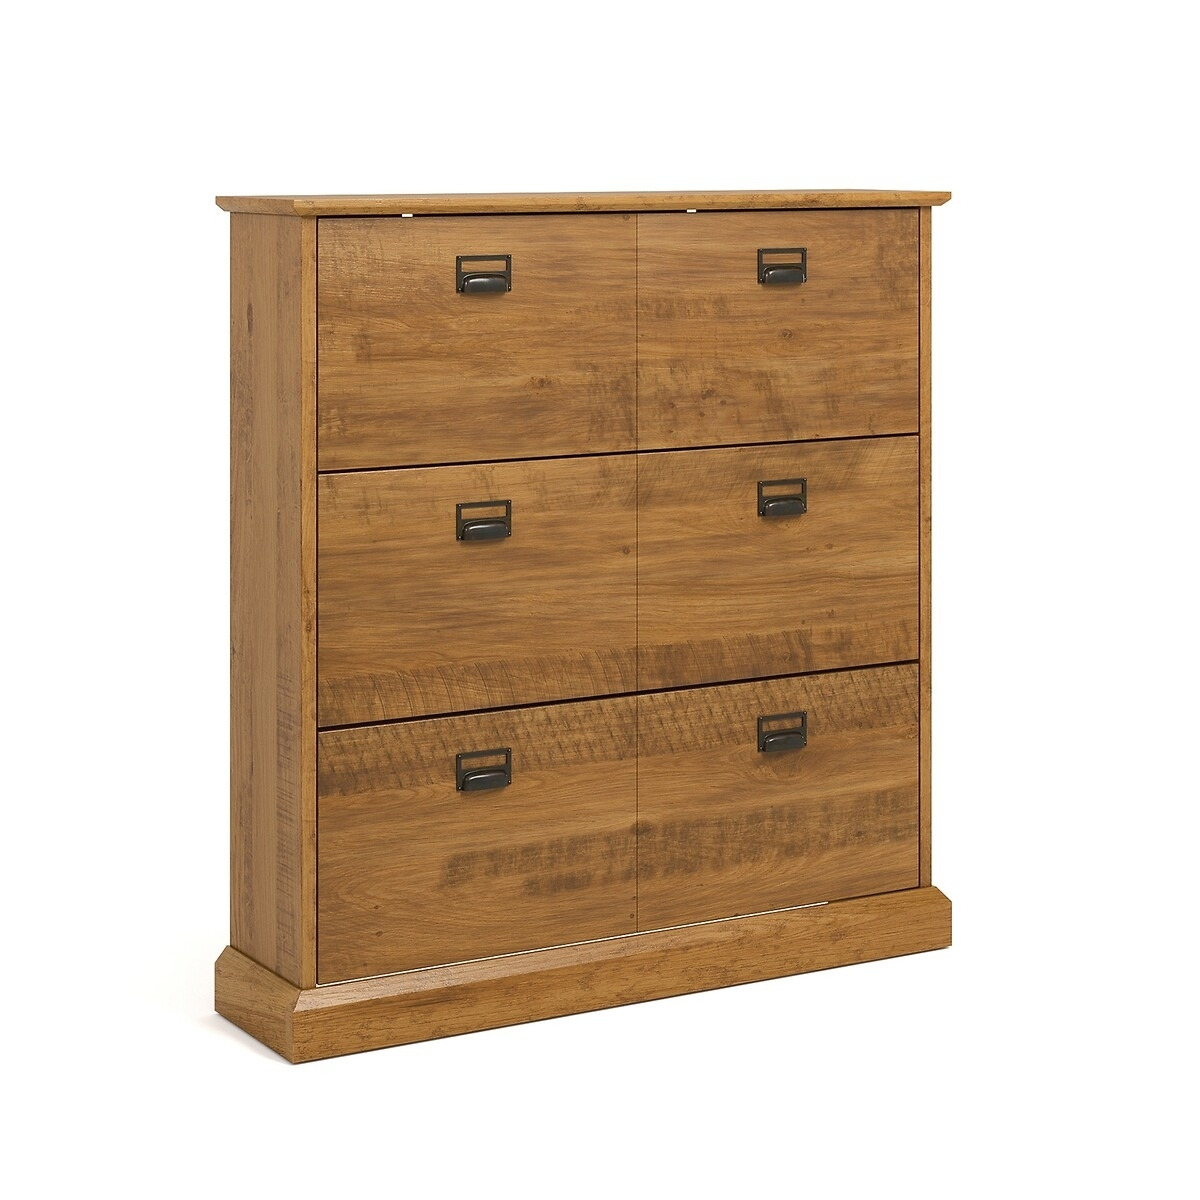 Lindley Shoe Cabinet, 3 Pull Down Doors - image 1